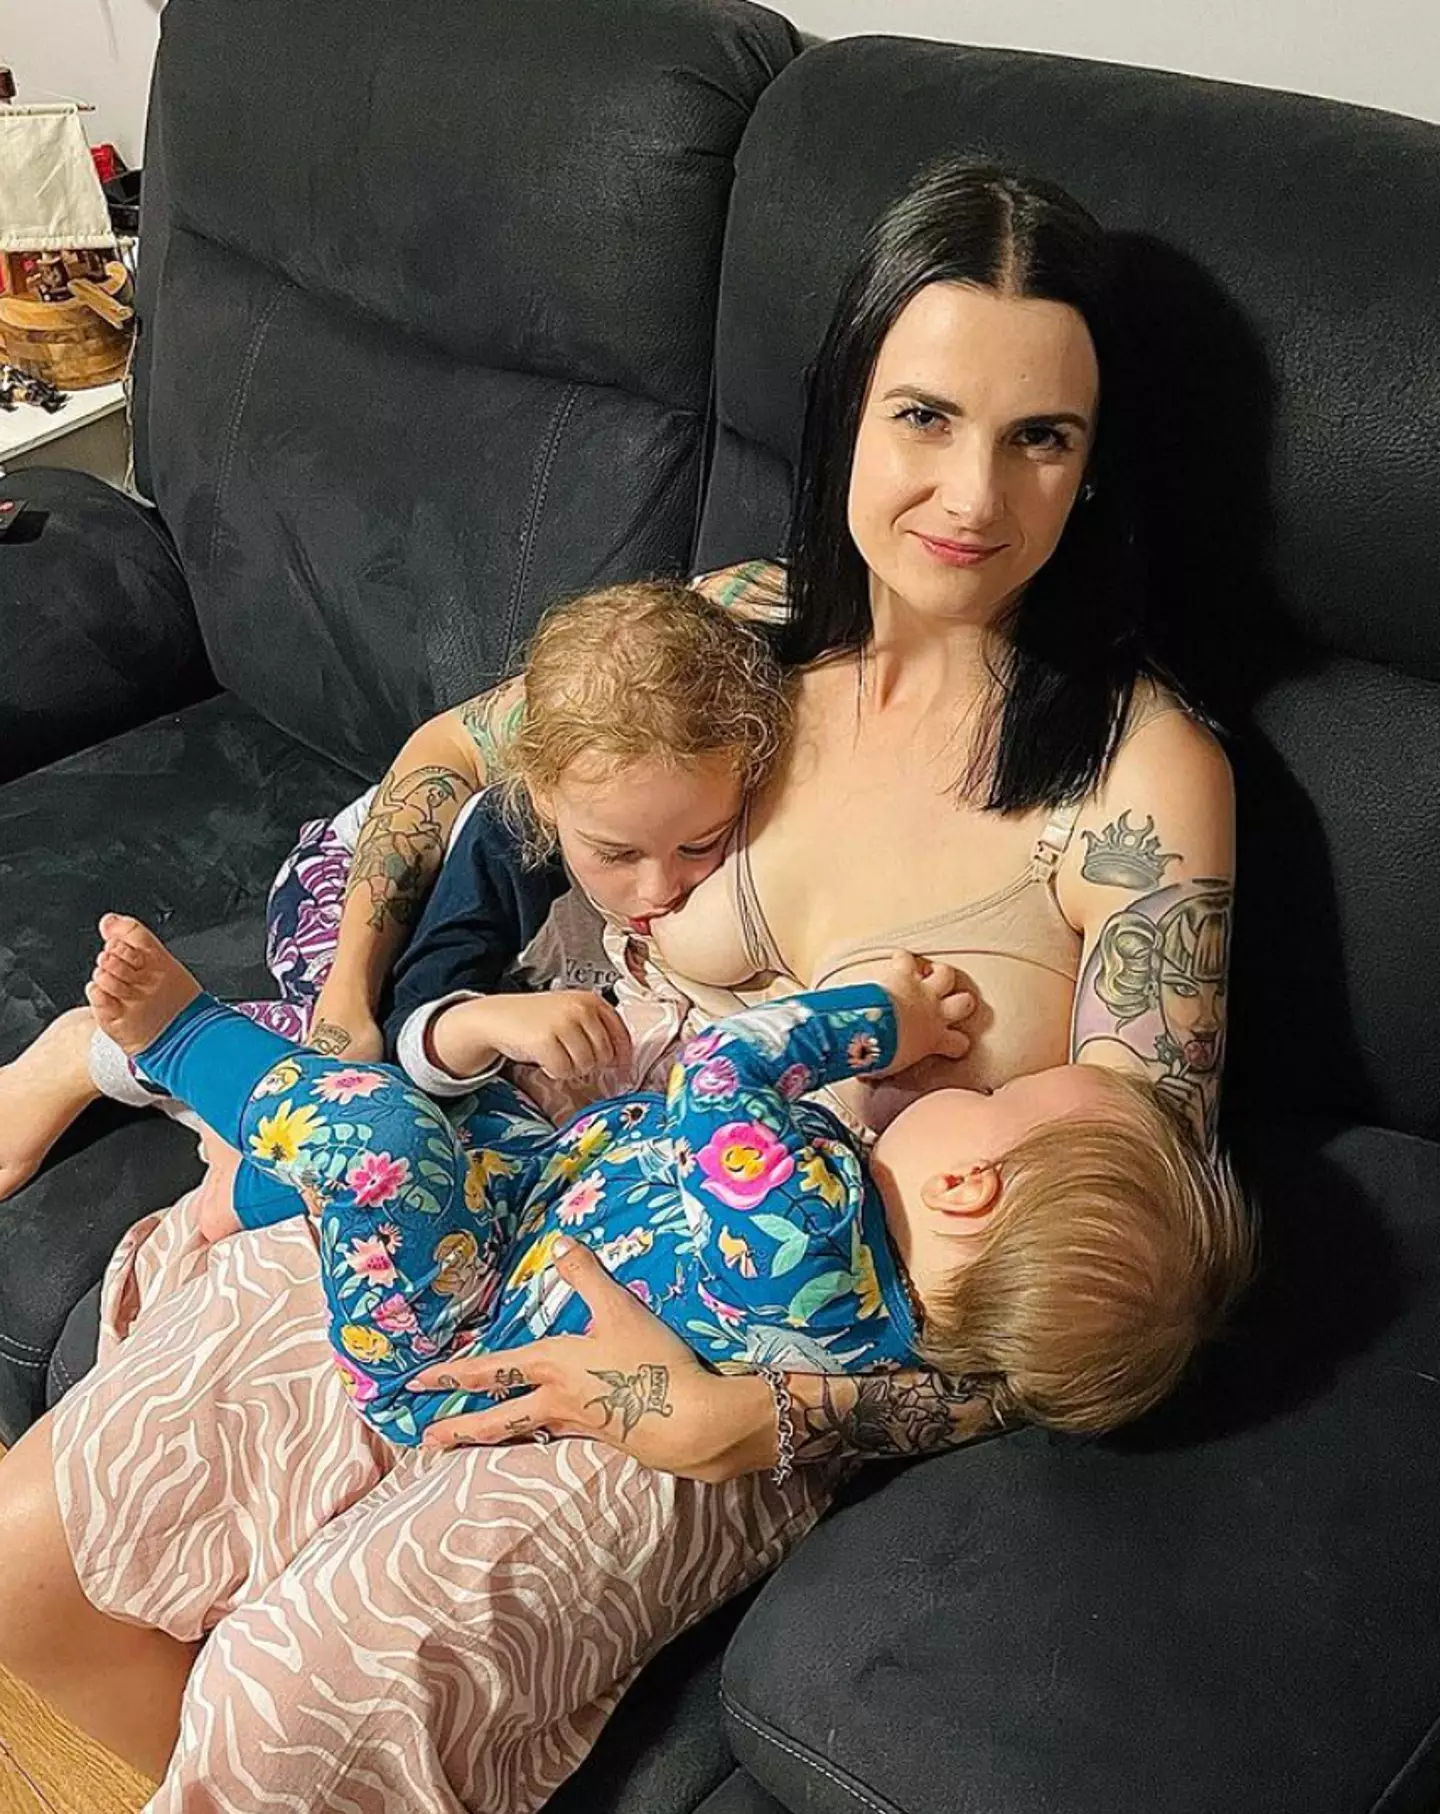 She is breastfeeding until her children are ready to stop.